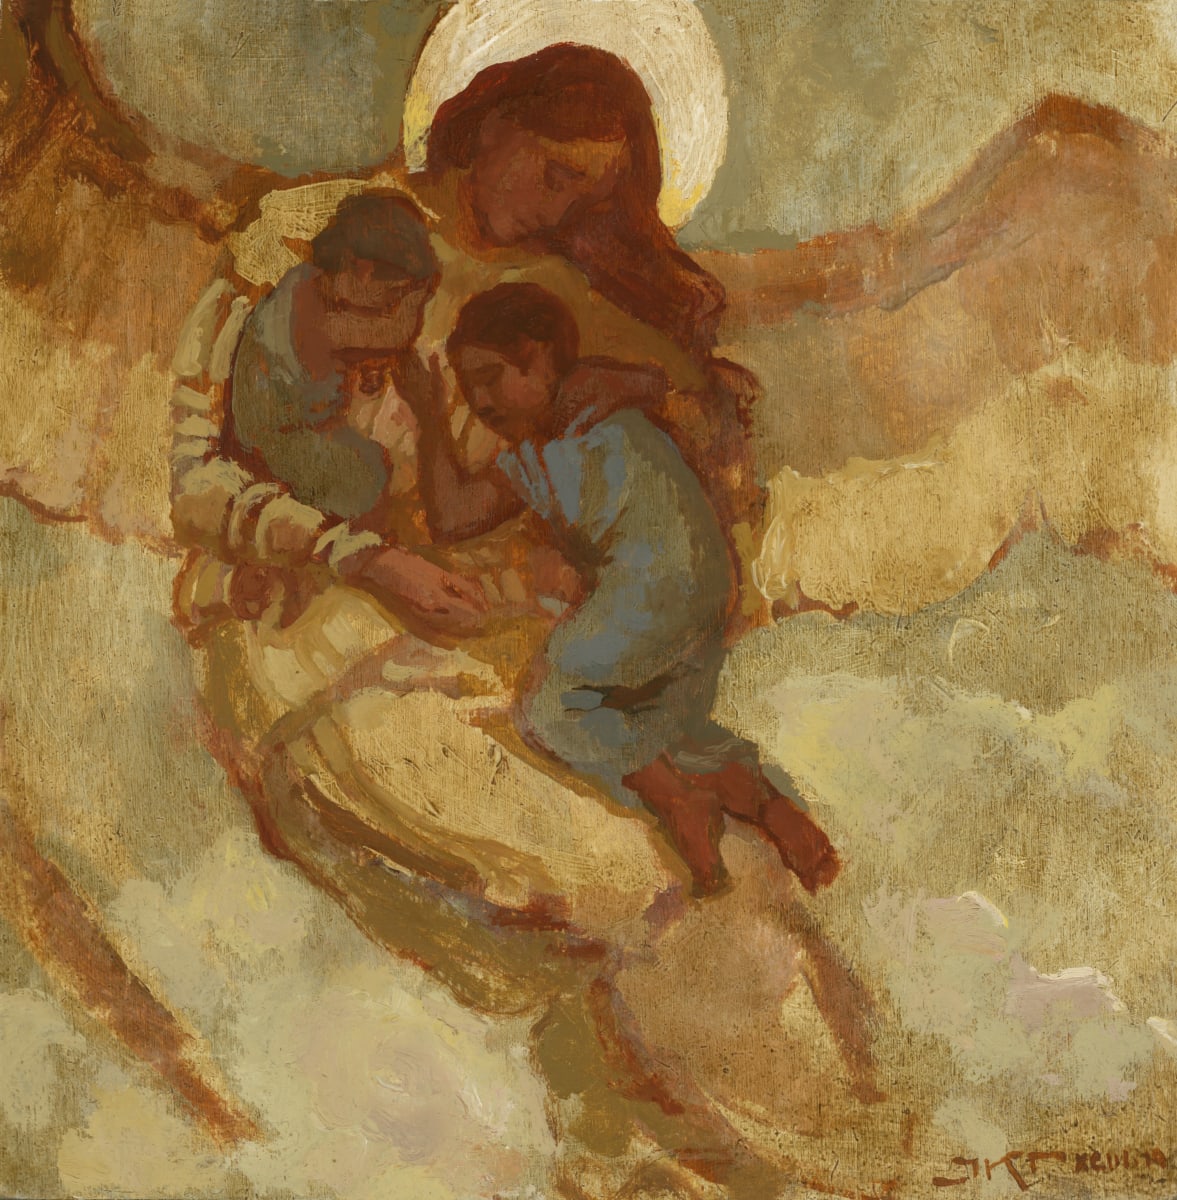 Carried by J. Kirk Richards  Image: Daily Painting #20, 2019. An angel carries two little boys. 